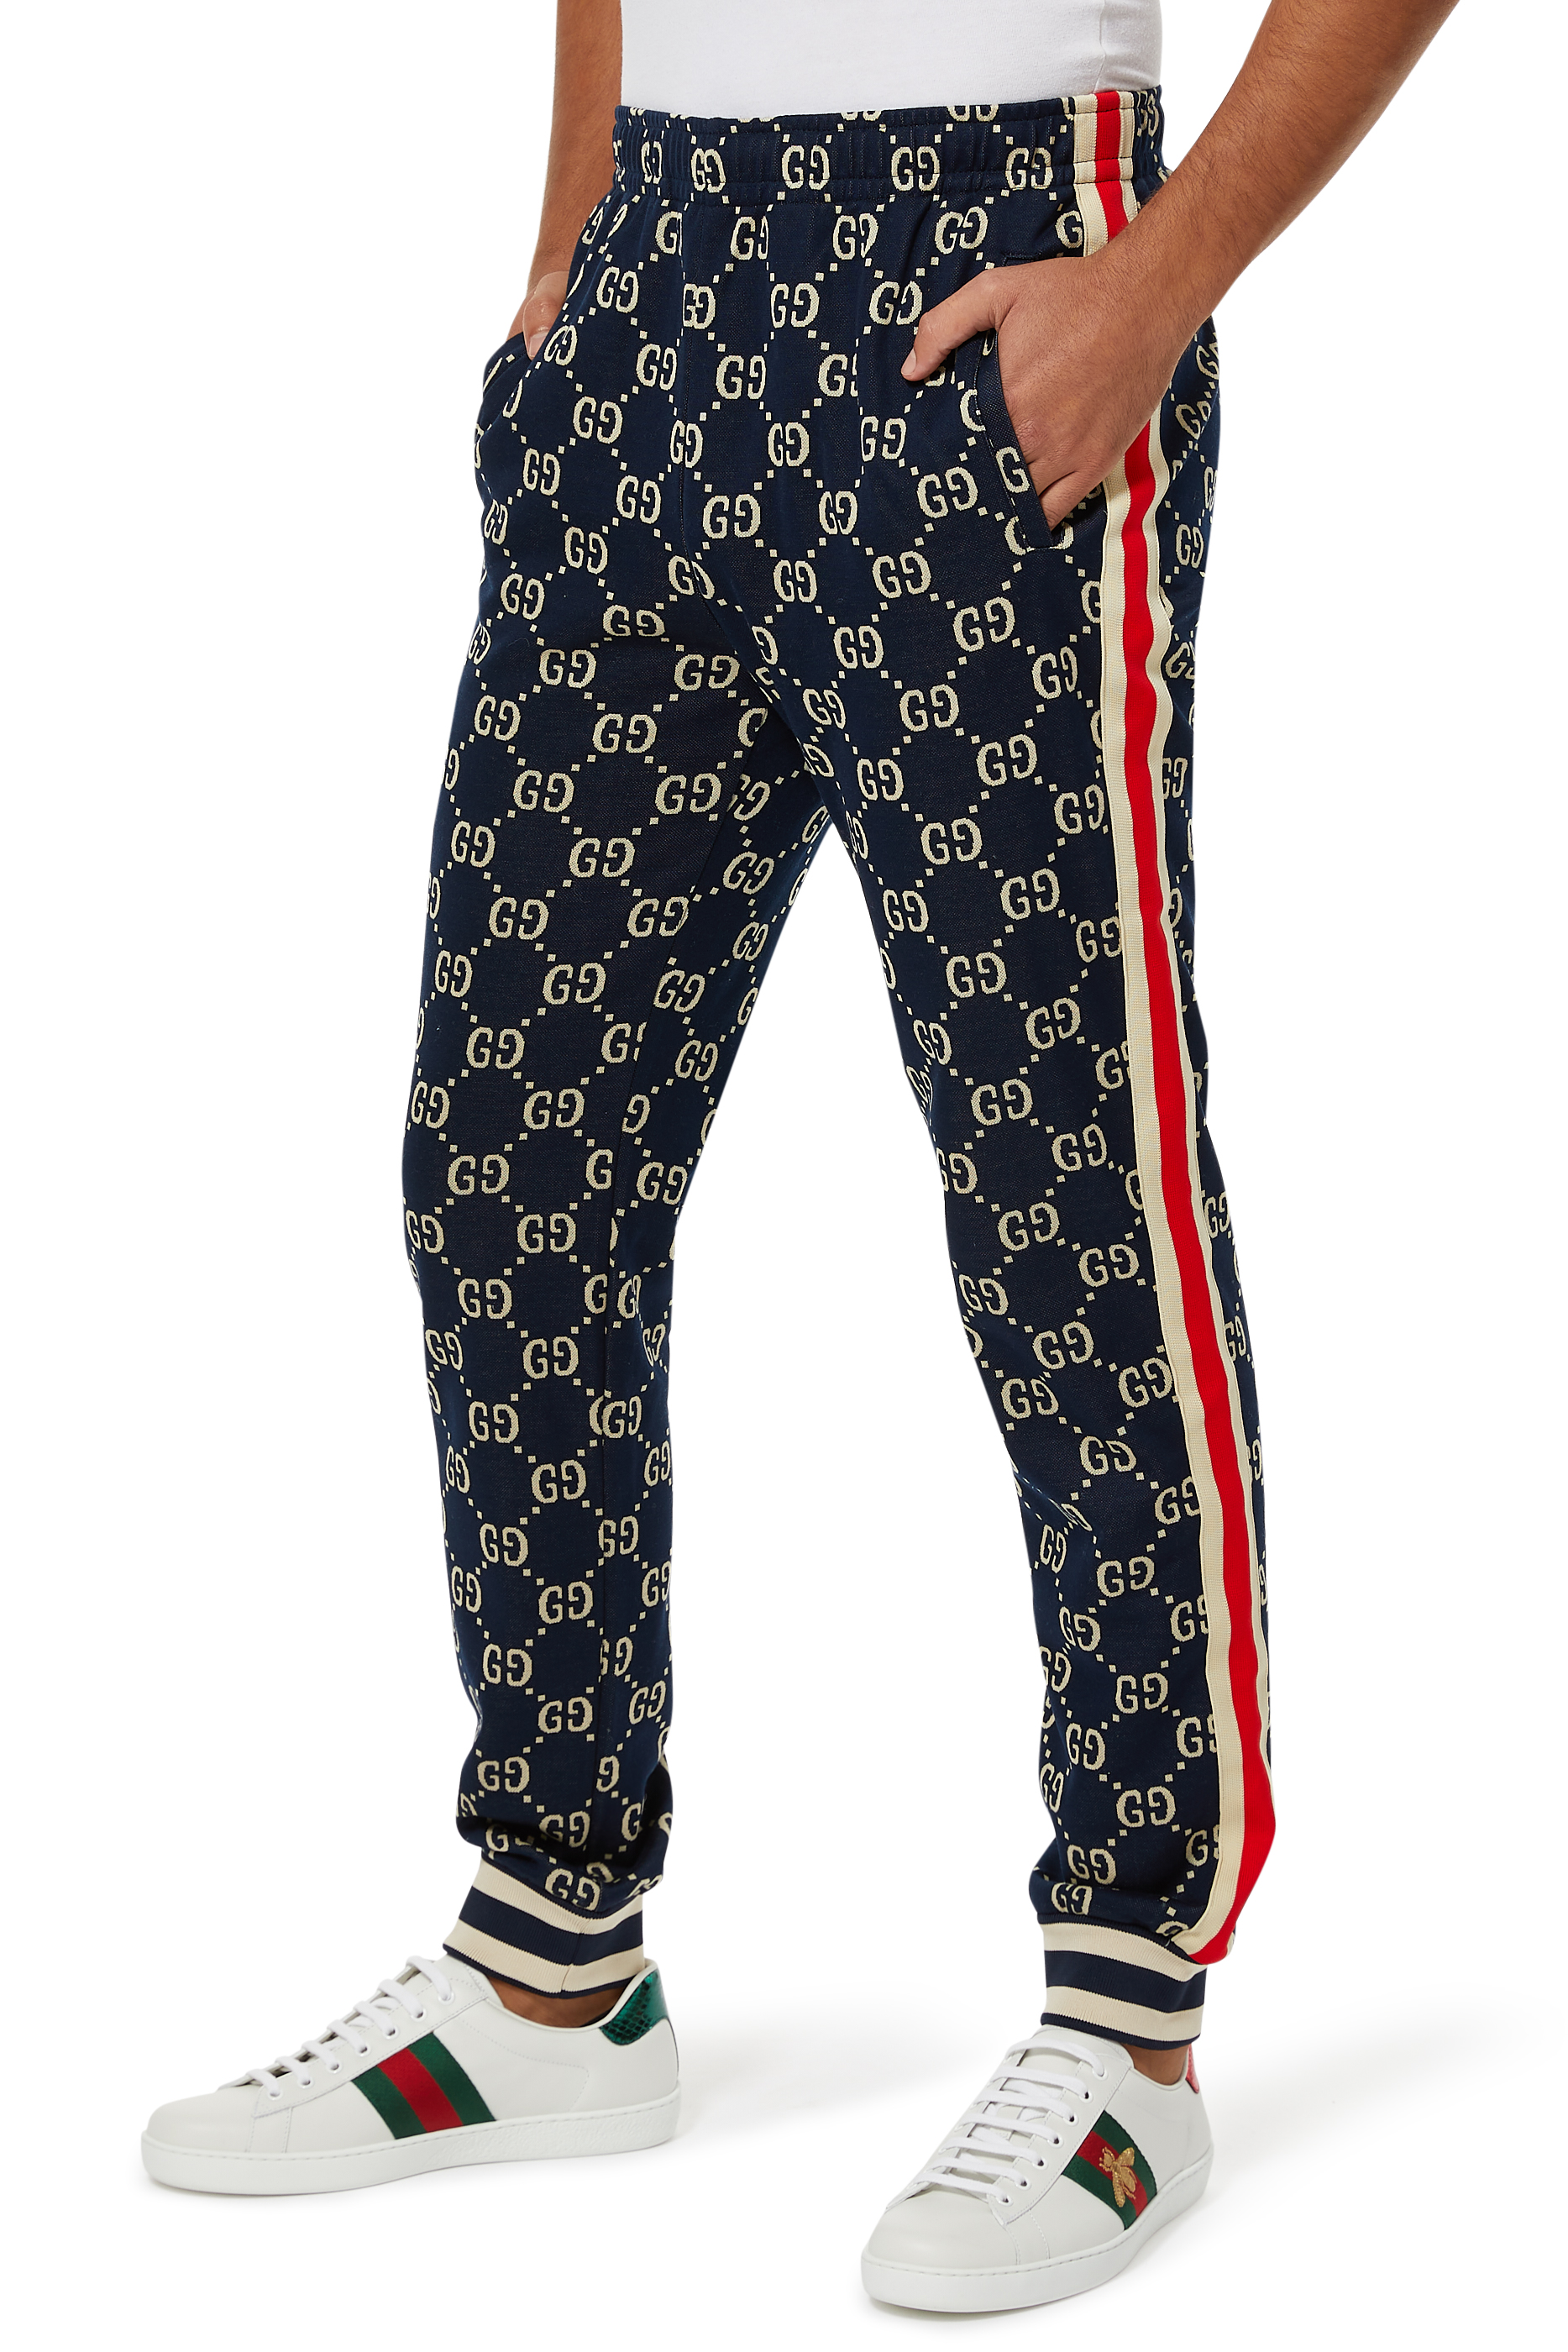 Buy Gucci Jacquard Jogging Pants - Mens for AED 4550.00 Trousers | Bloomingdale's